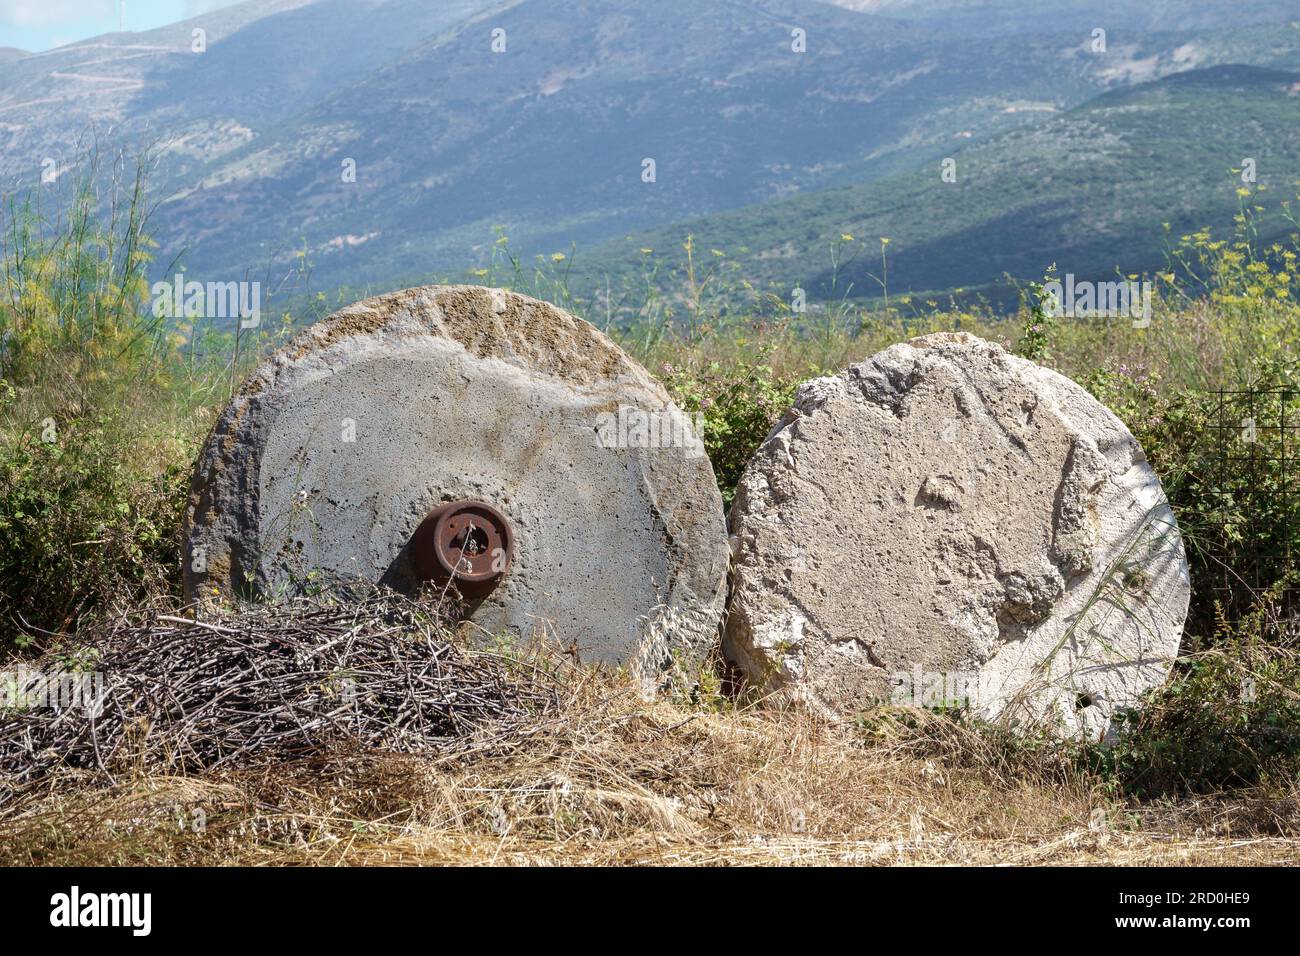 Two redundant olive press grind stones in a field with mountains in the background Stock Photo